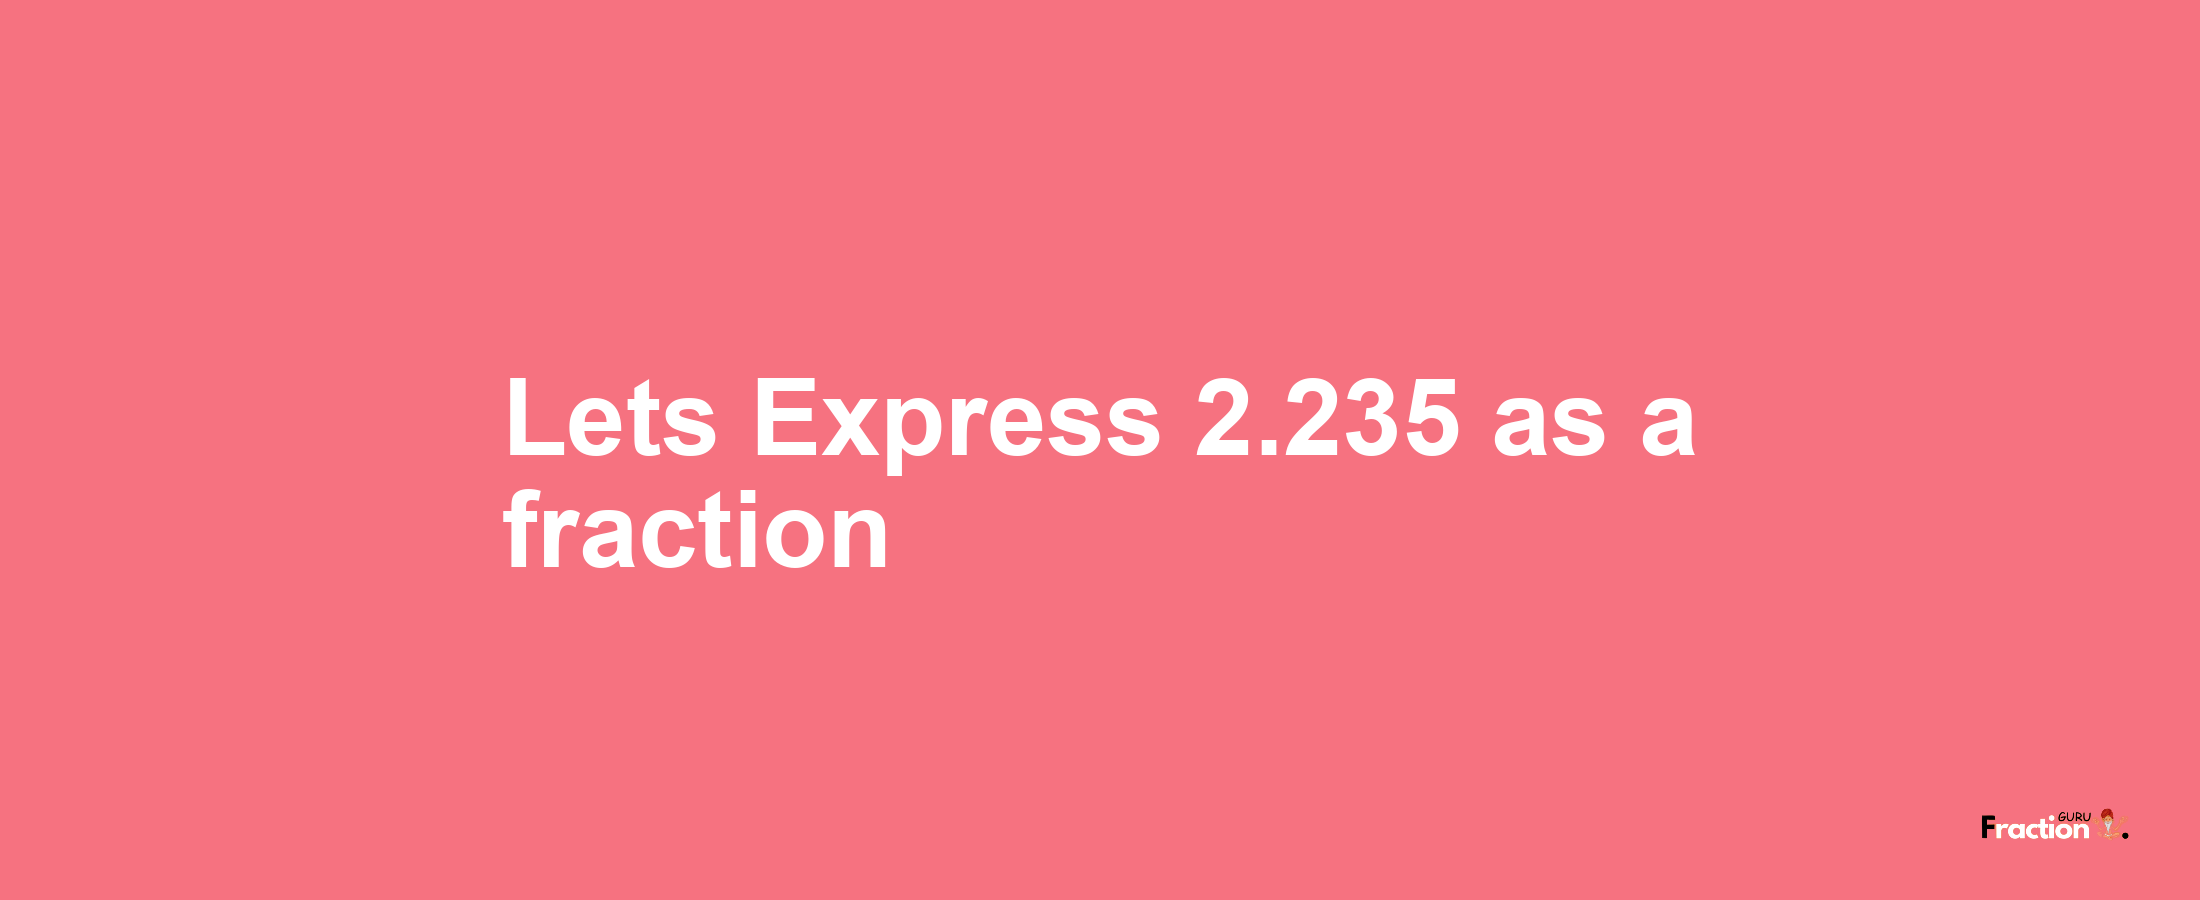 Lets Express 2.235 as afraction